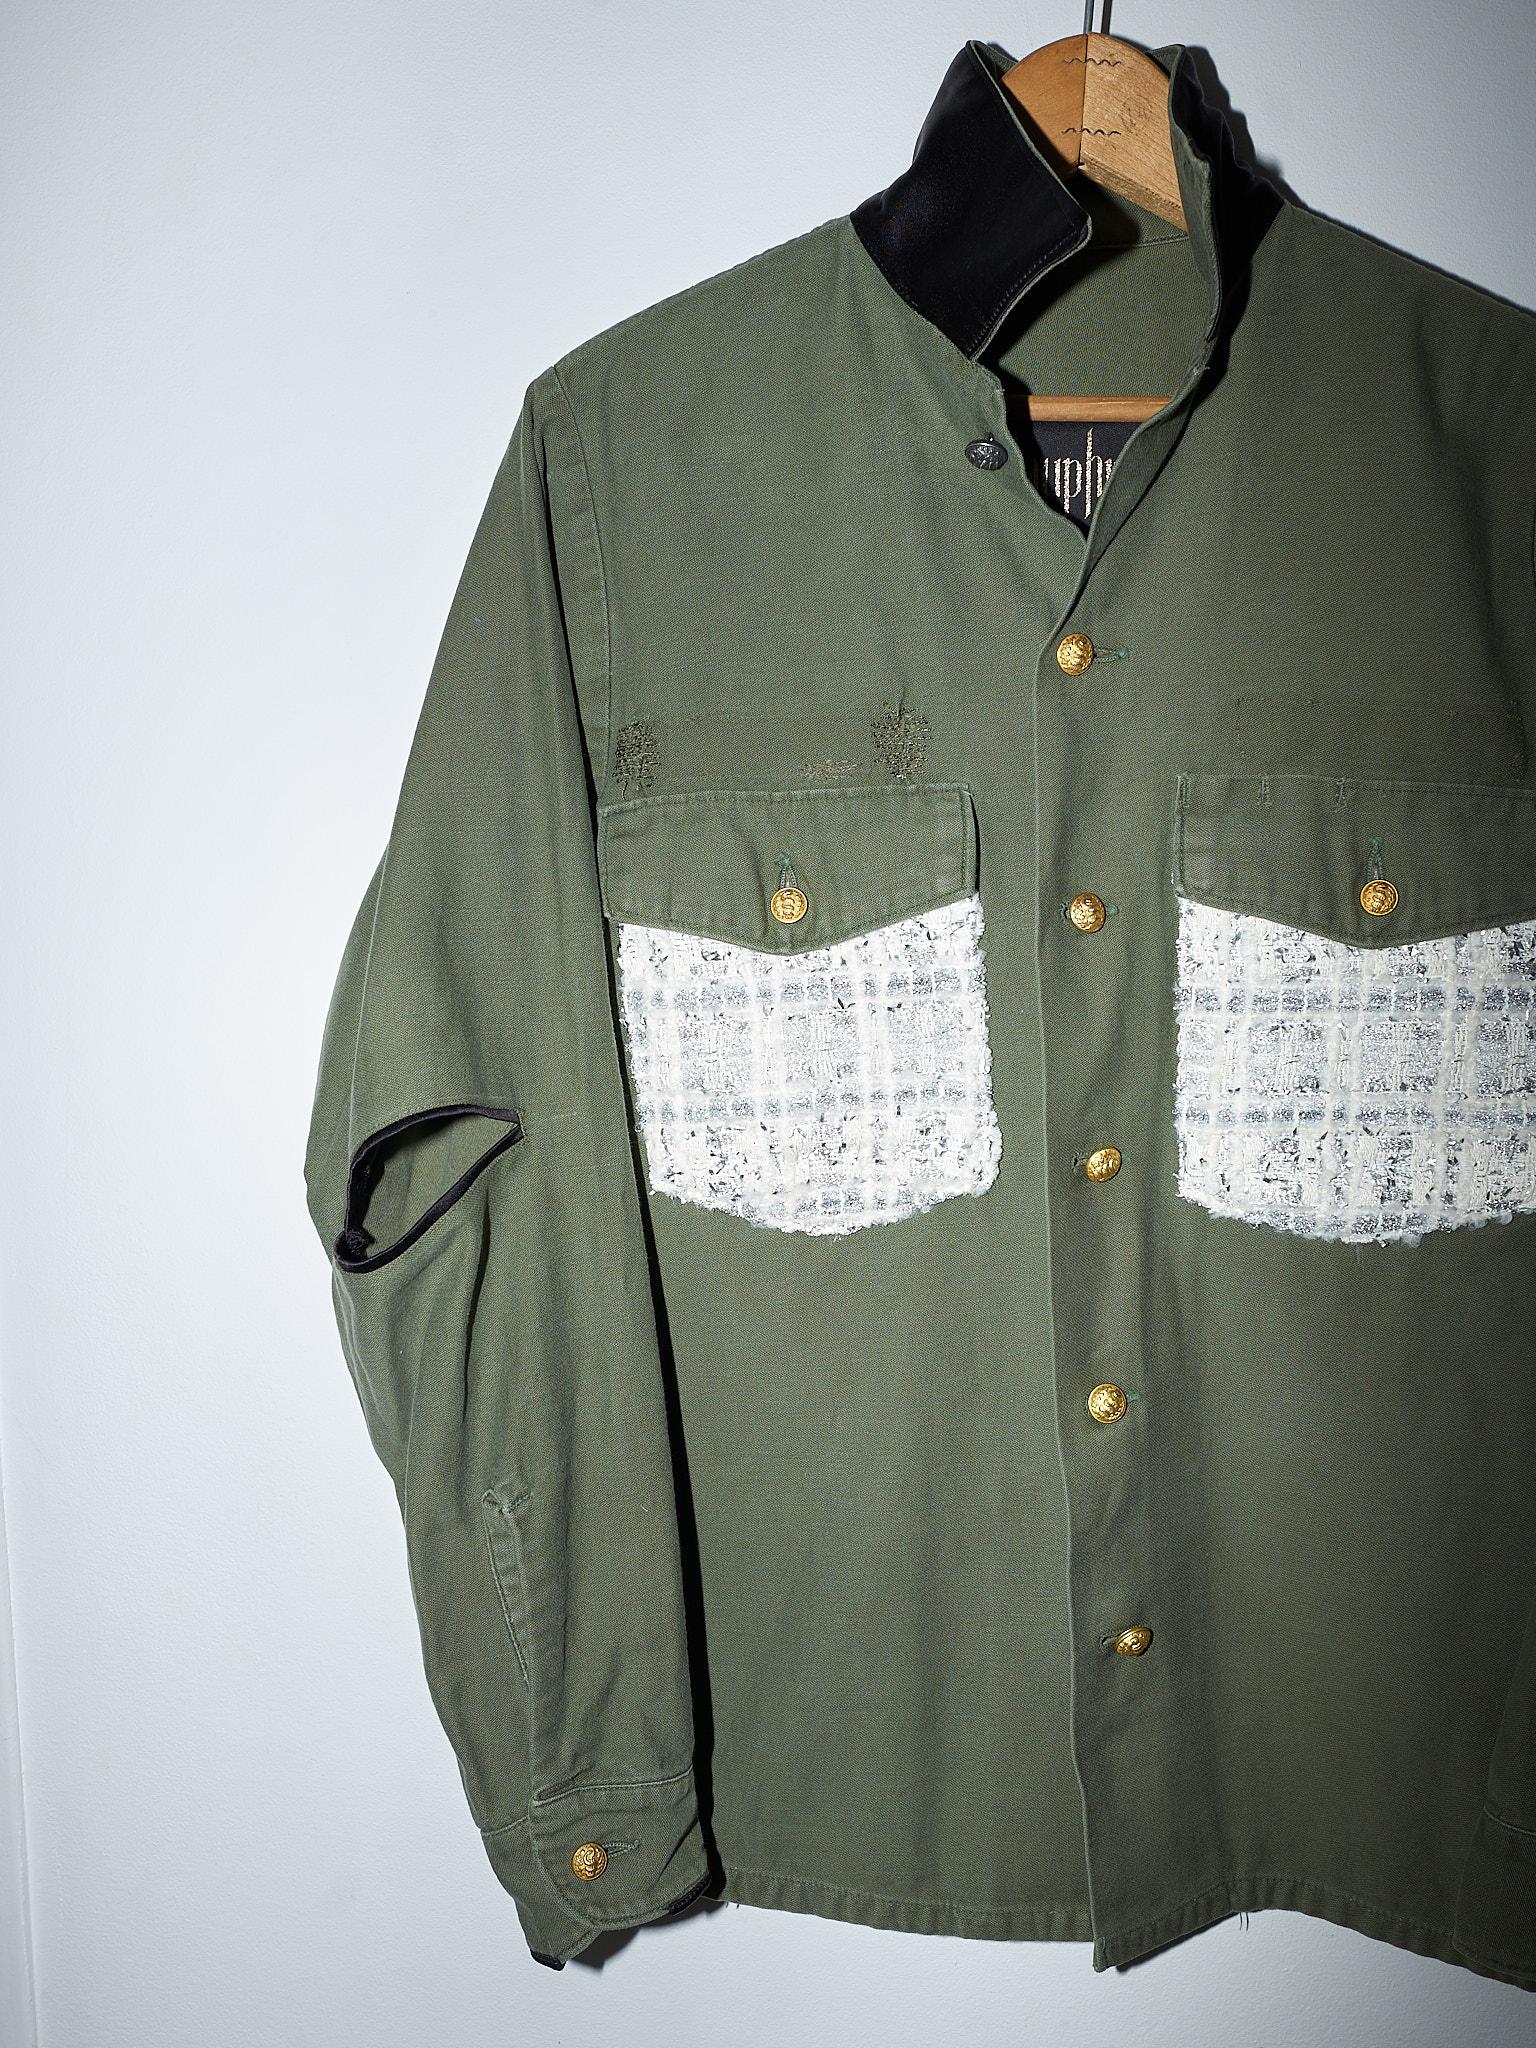 Designer J Dauphin  
Size: Medium
Repurposed Vintage Us Green Military Jacket with White Lurex Tweed Black Silk Collar and Open Elbow
French Vintage Military Army Gold Buttons

Size: M / FR 40 / EU 38 / UK 10

Sustainable Luxury, Up-cycled and